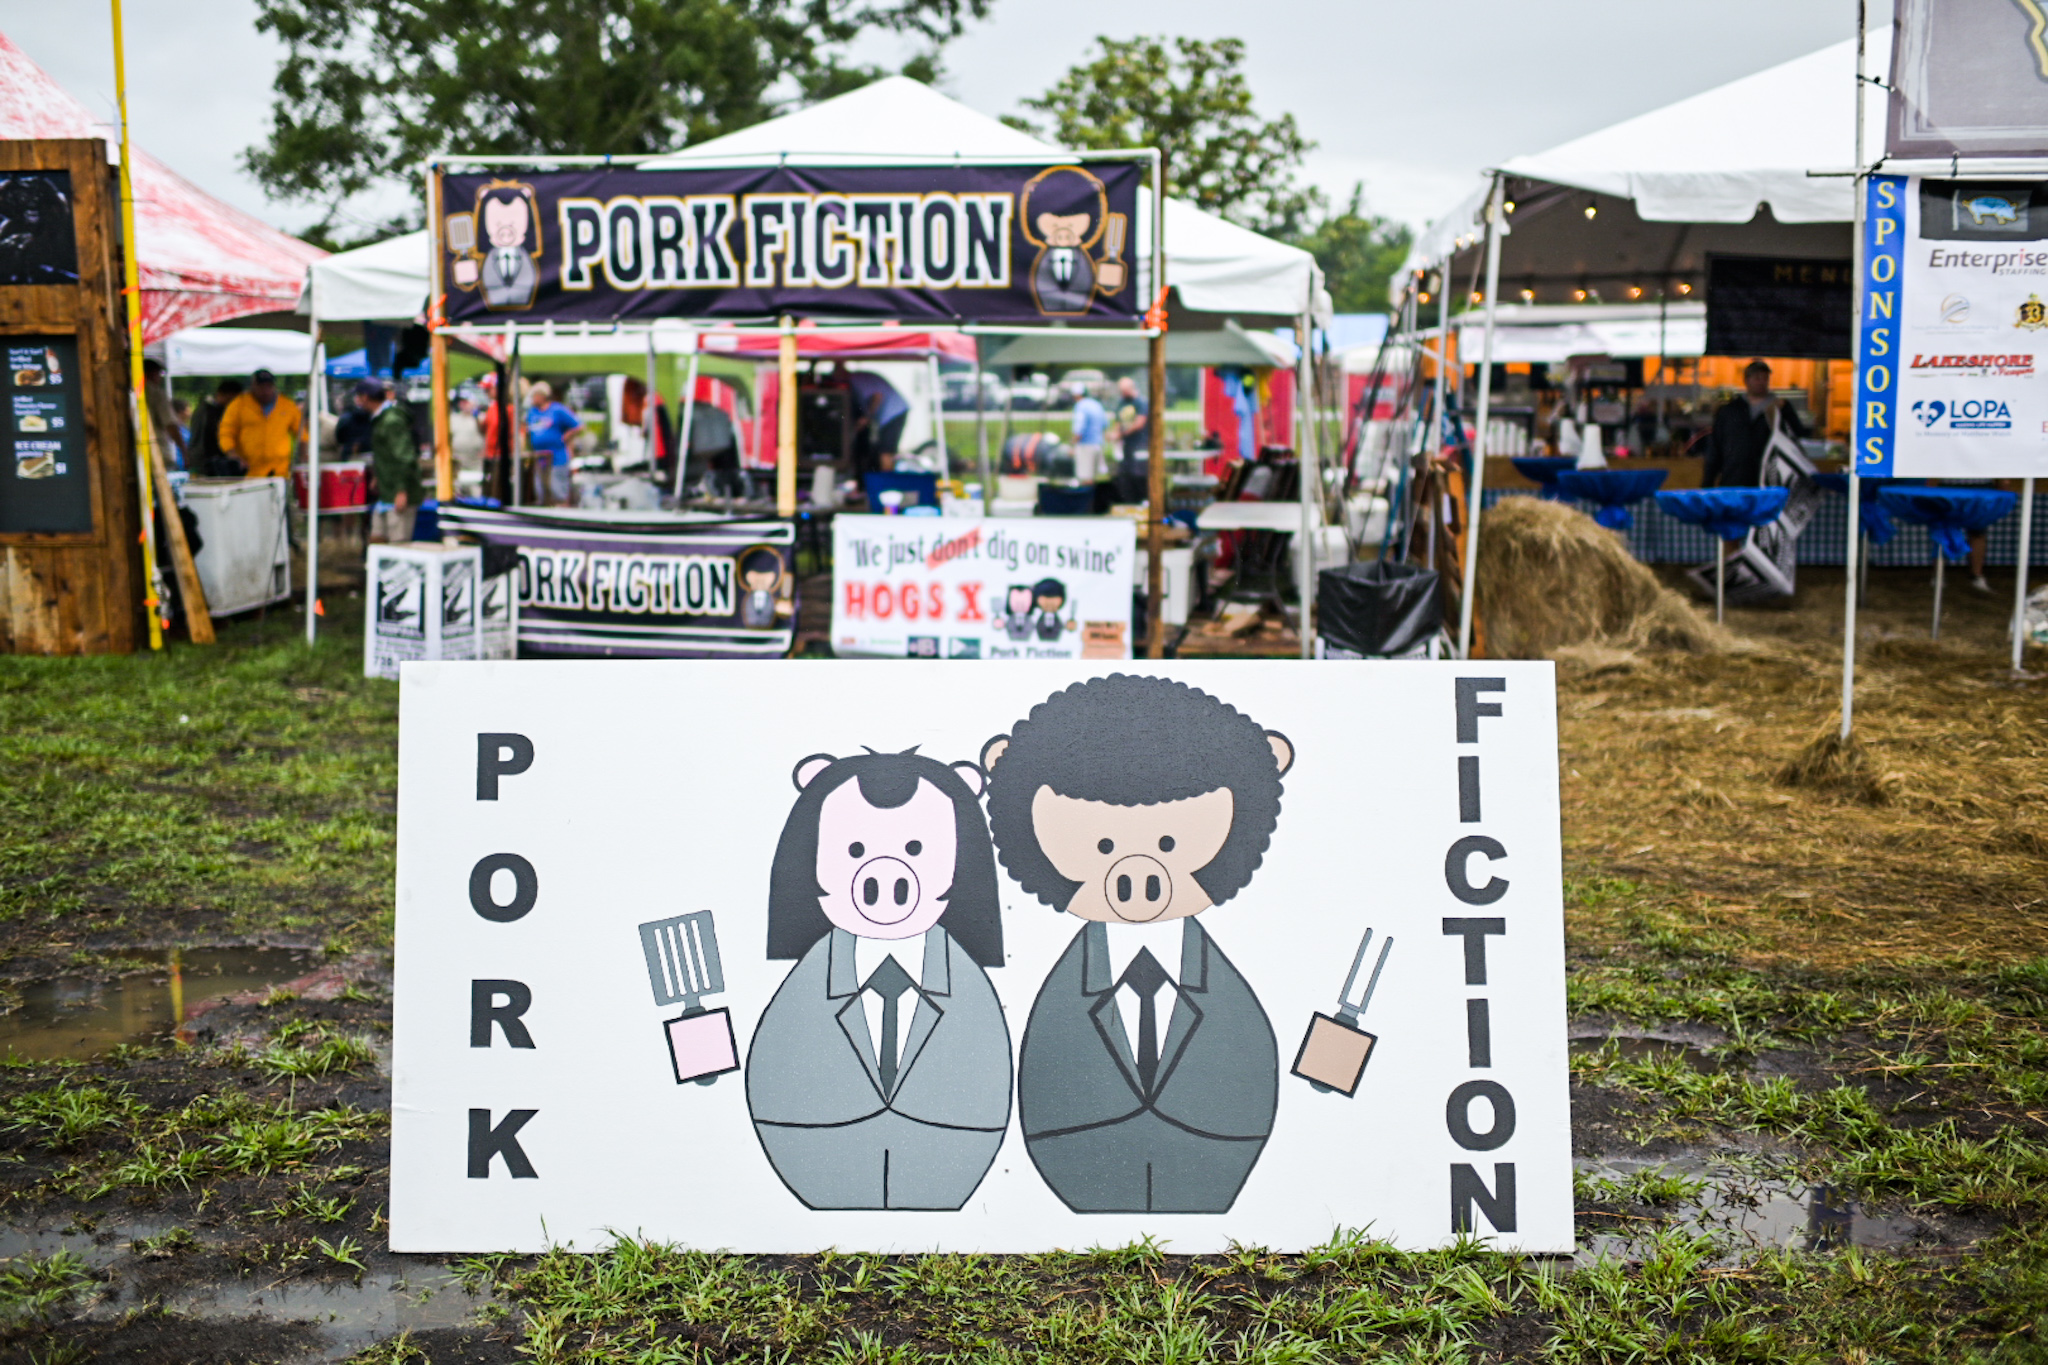 A sign from a competitor's booth - Pork Fiction